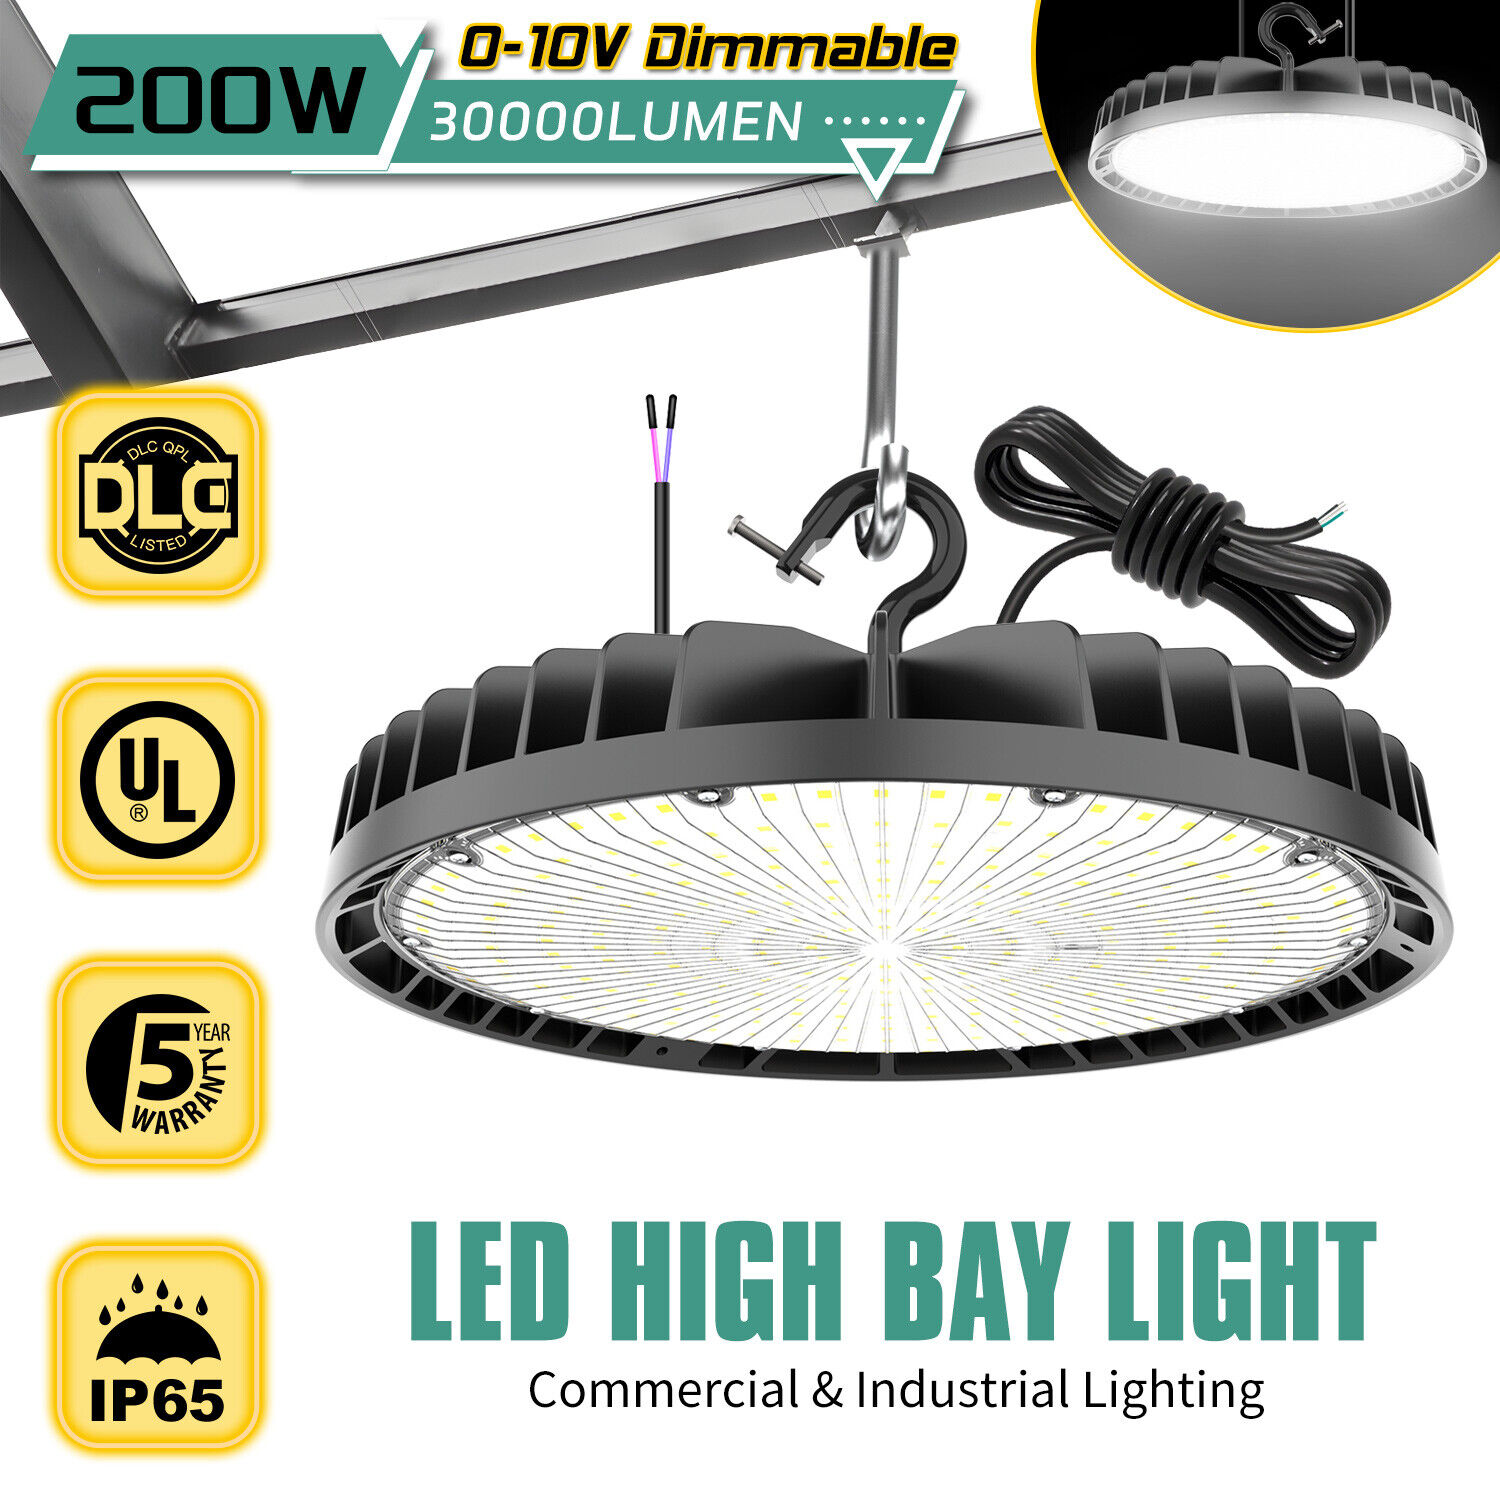 200W LED High Bay Light Dimmable Industrial Workshop Lamp 30000lm 5000K Daylight